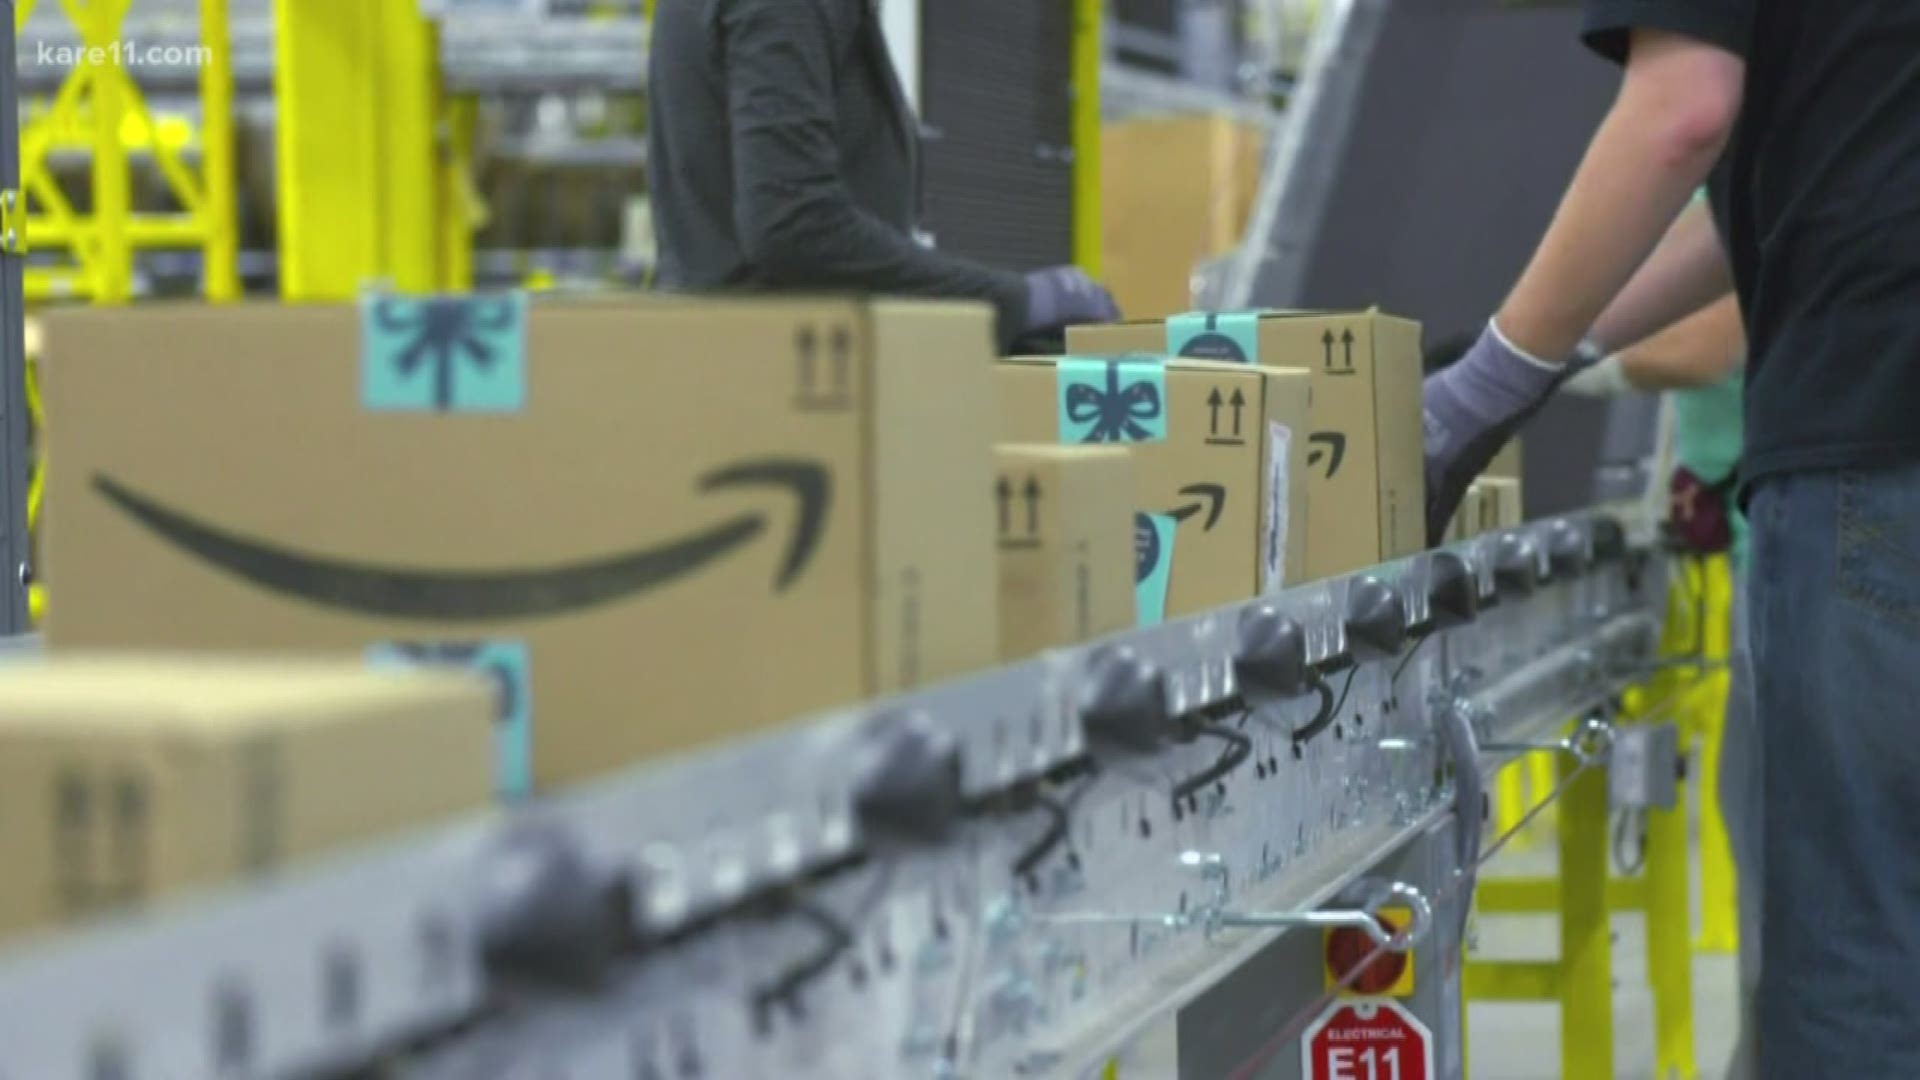 Morgan Stanley analysts predict that Amazon will control nearly Amazon could ship more volume than UPS and FedEx by the year 2022.